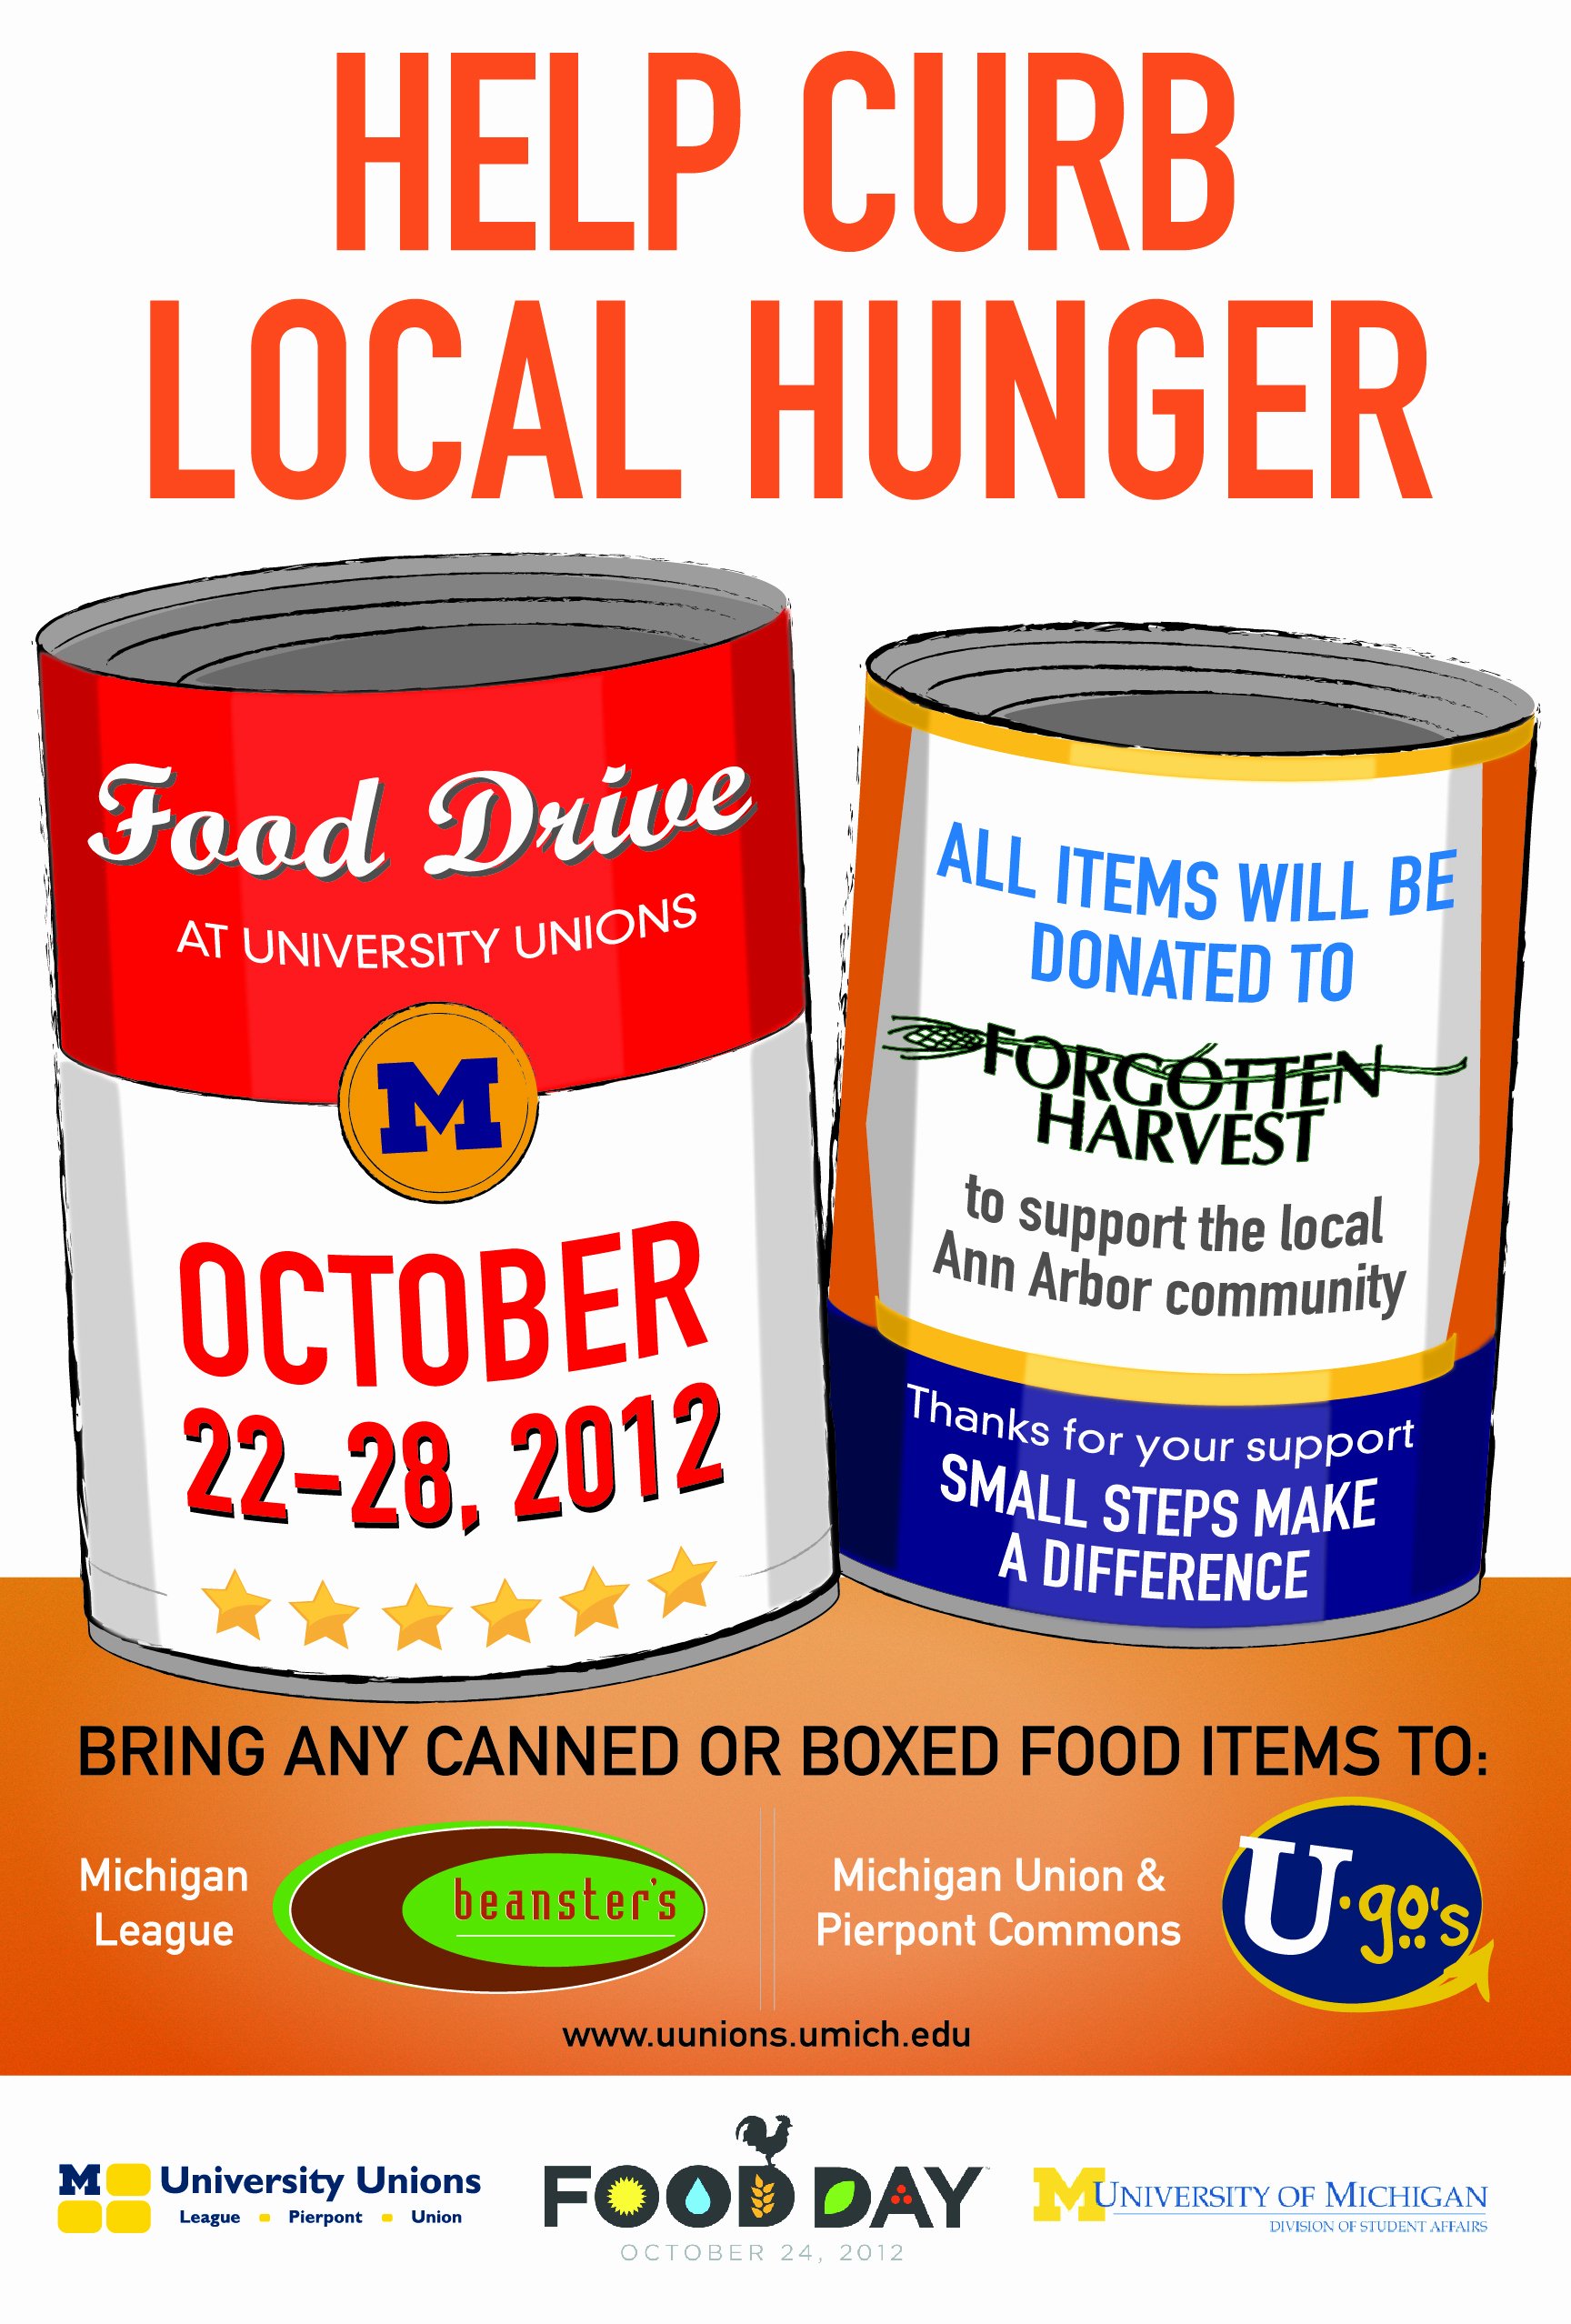 Canned Food Drive Flyer Awesome Celebrate Food Day Oct 22 26